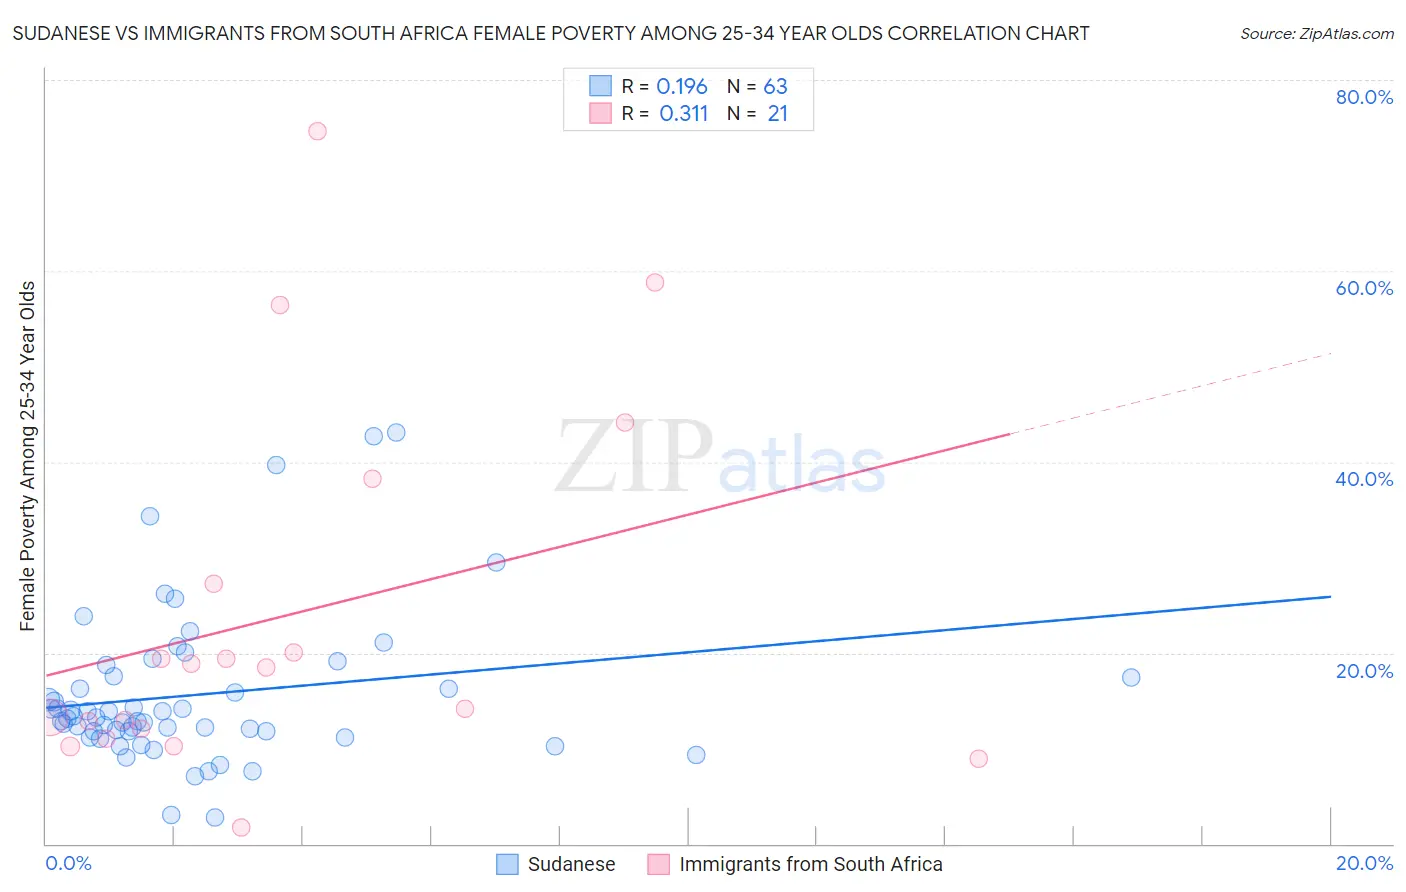 Sudanese vs Immigrants from South Africa Female Poverty Among 25-34 Year Olds